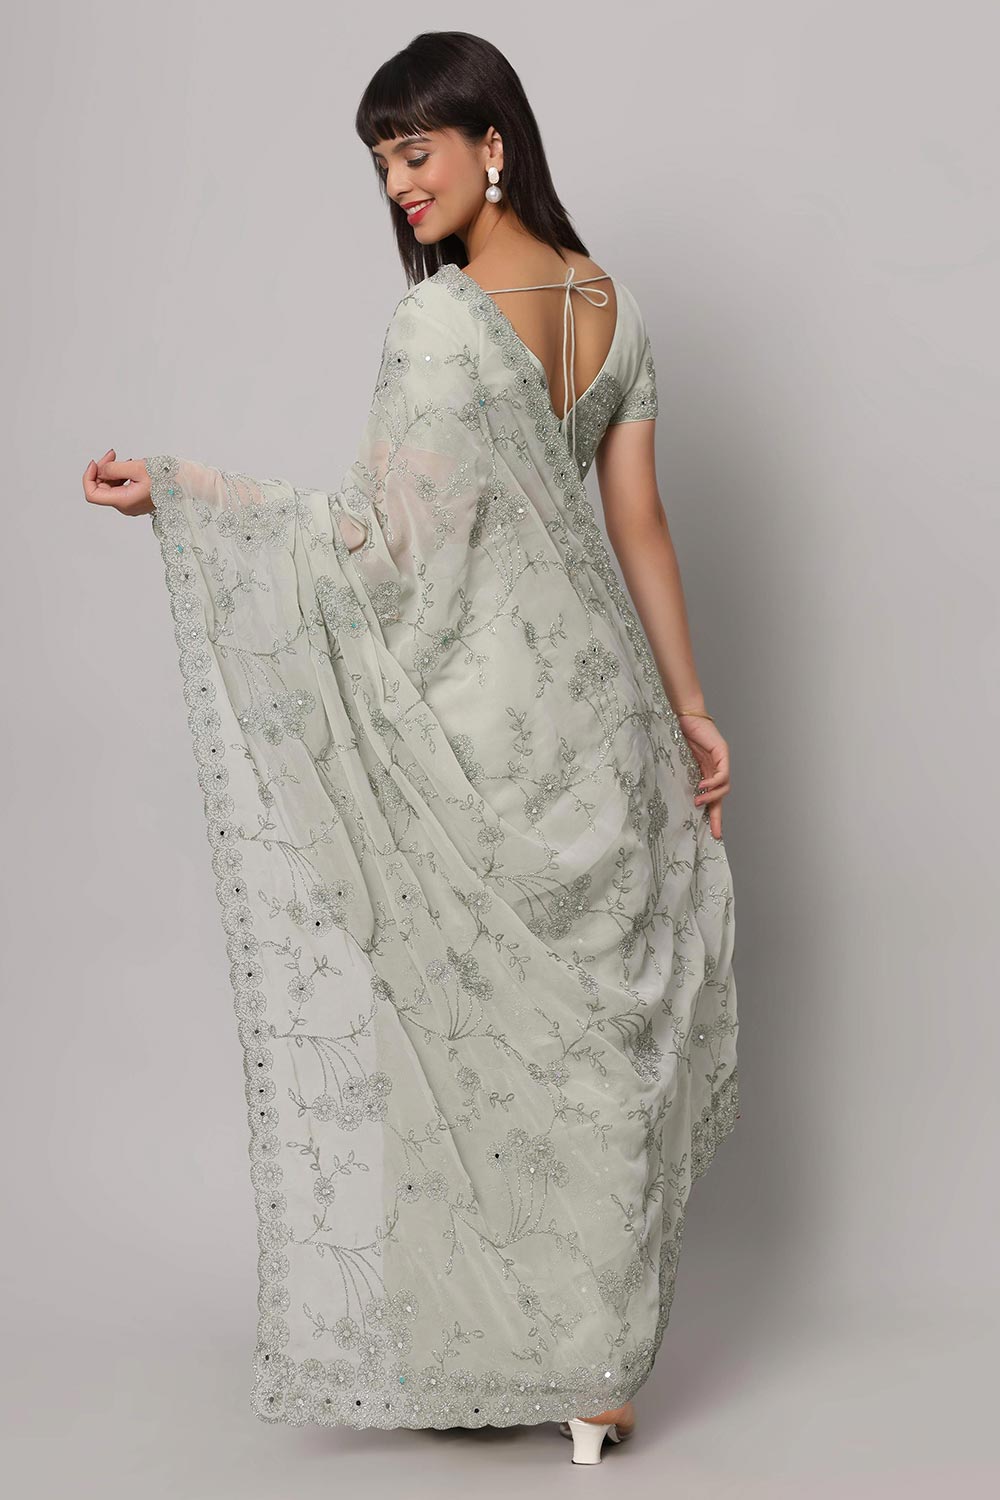 Shop Esha Light Sea Green Embroidered Mirror Work One Minute Saree at best offer at our  Store - One Minute Saree